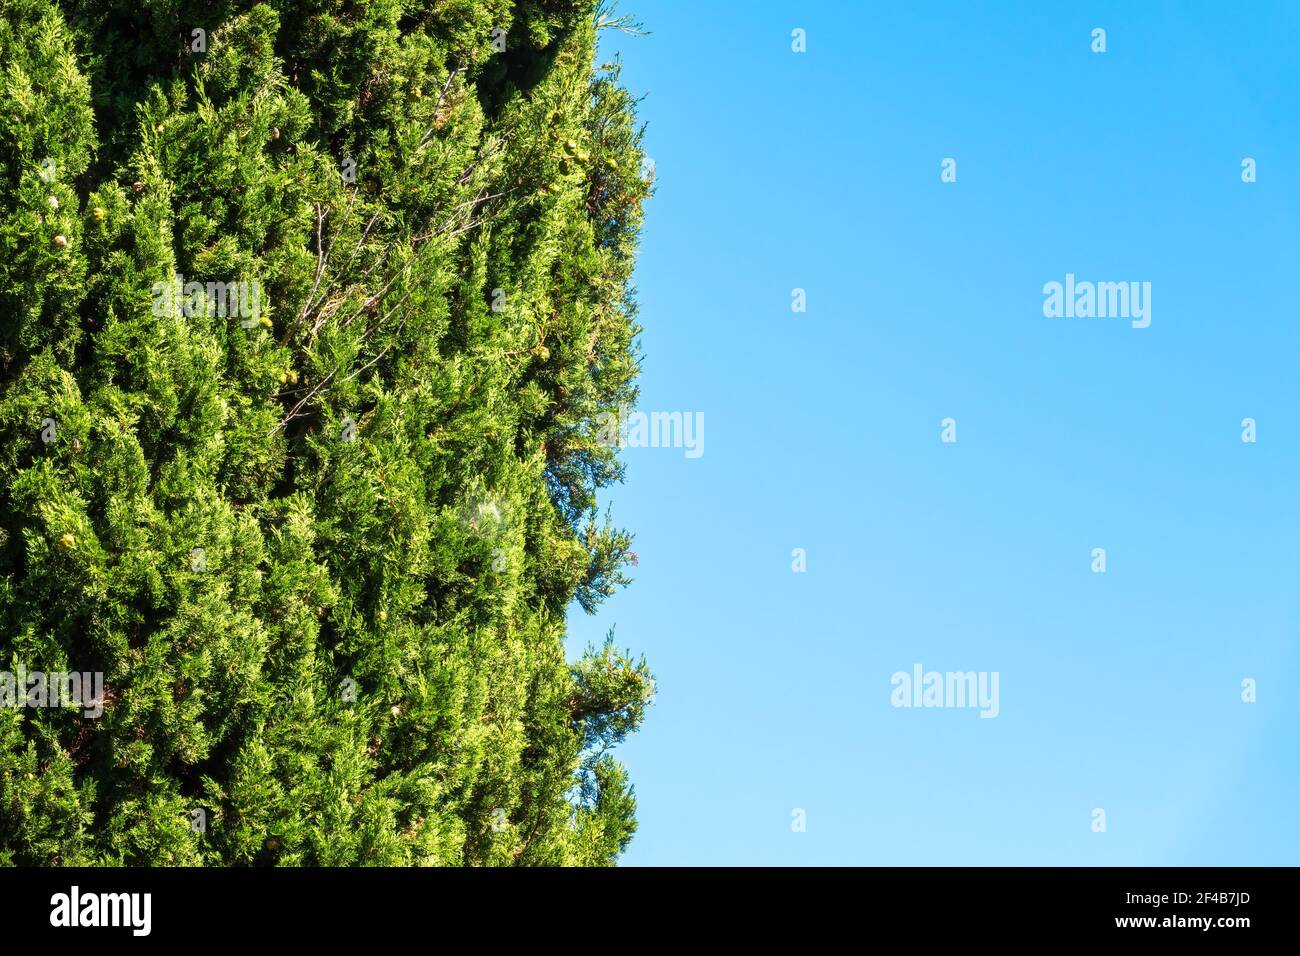 Branches of Cupressus tree on blue sky background. Tall evergreen tree with a pyramidal crown Stock Photo